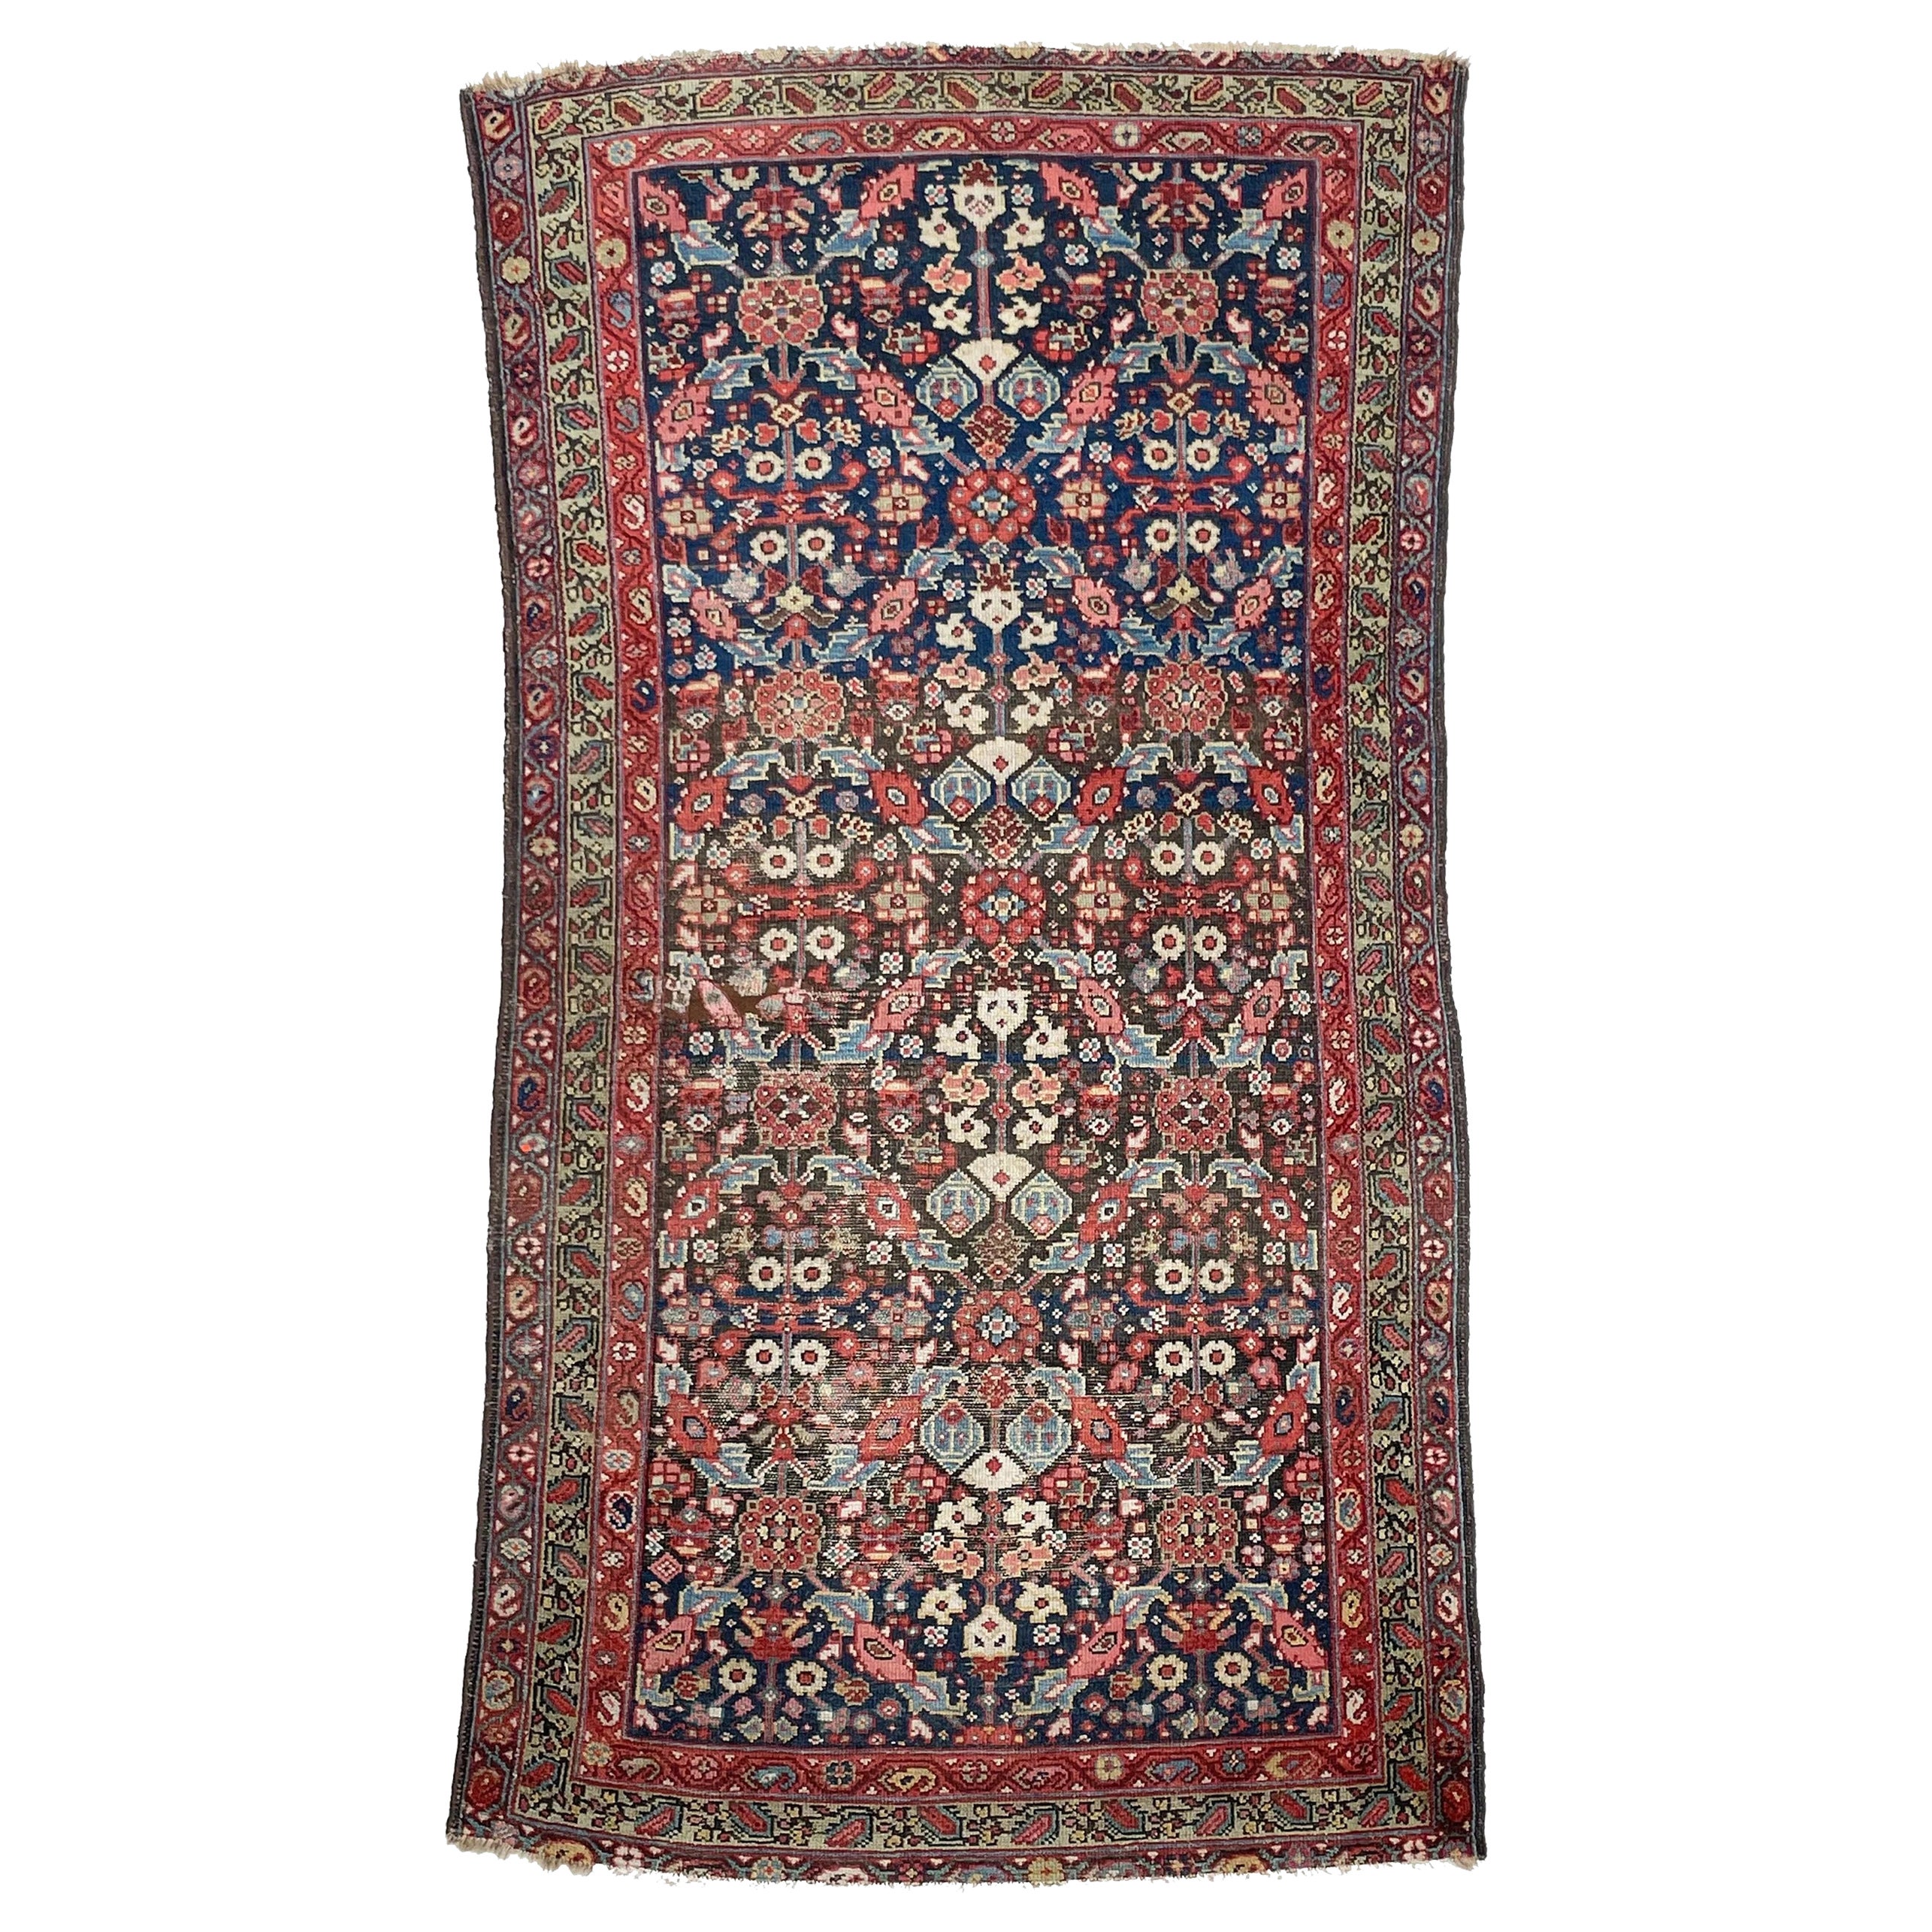 Sophisticated Moody European Sized Lattice Fence Design Antique Rug For Sale